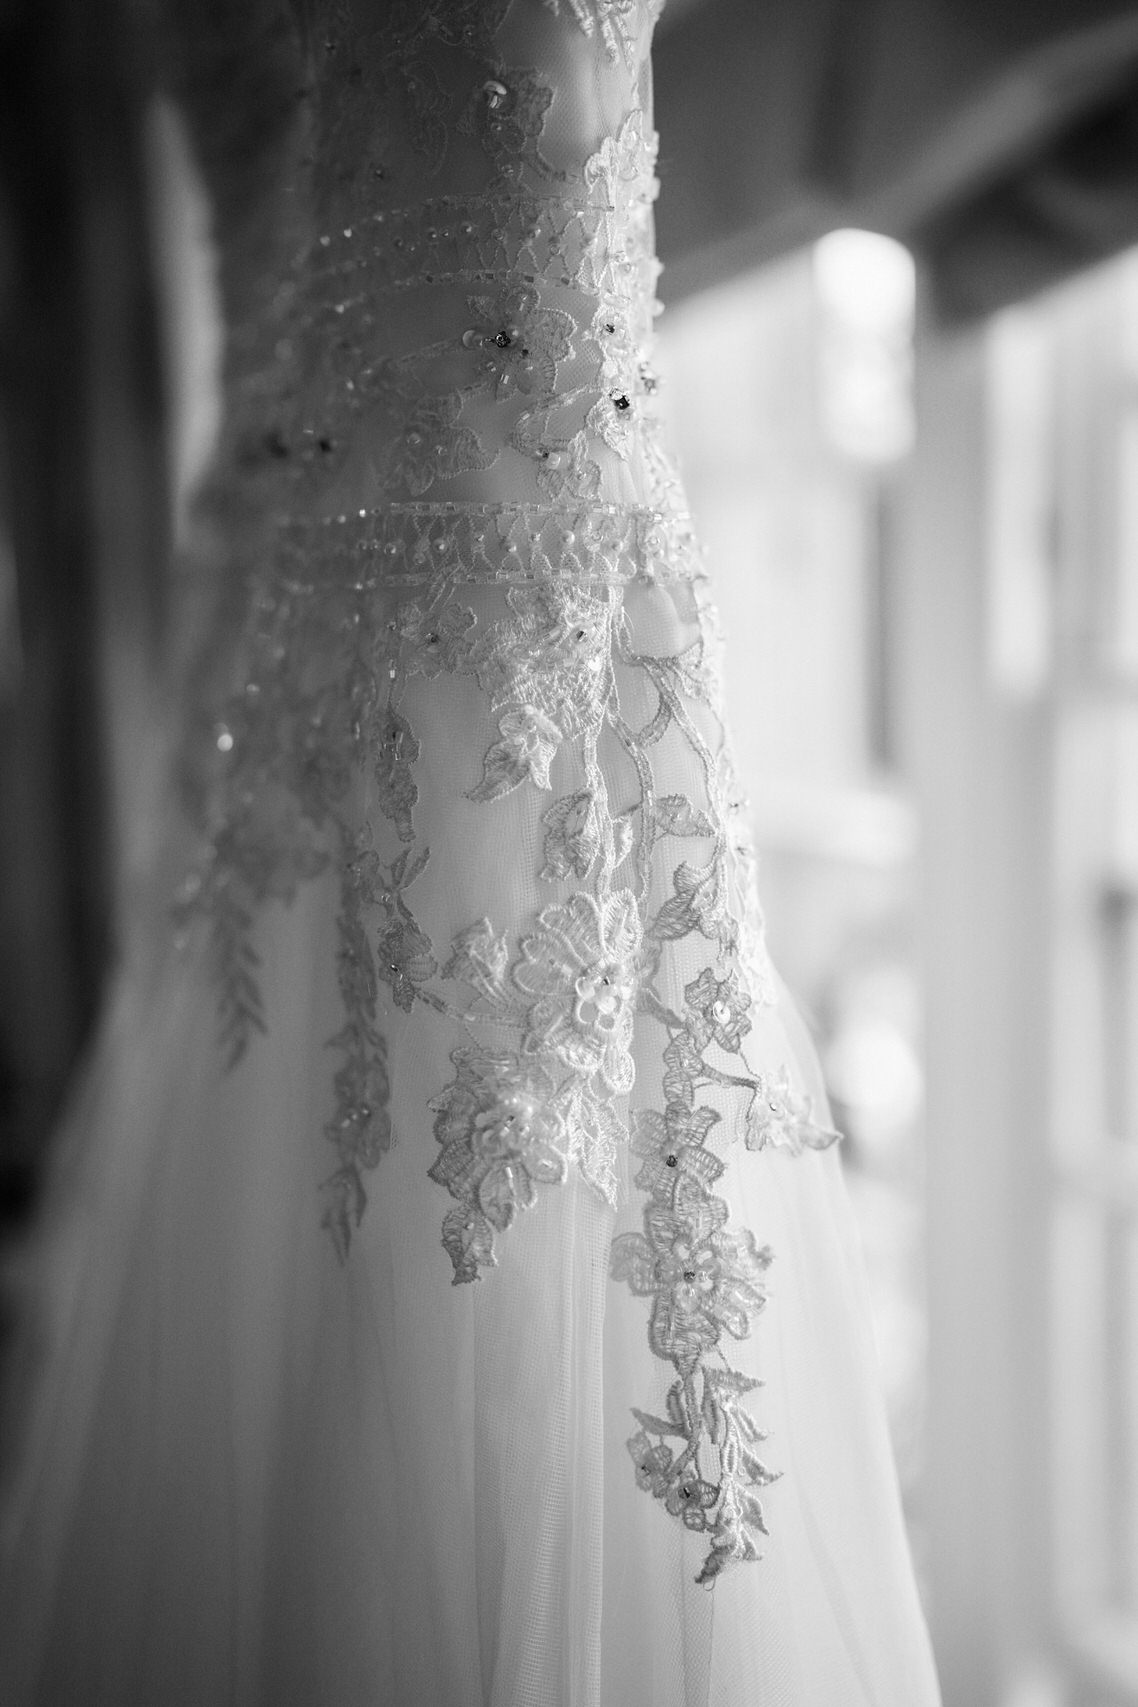 A wedding dress is hanging in a window, shown in a black and white picture.